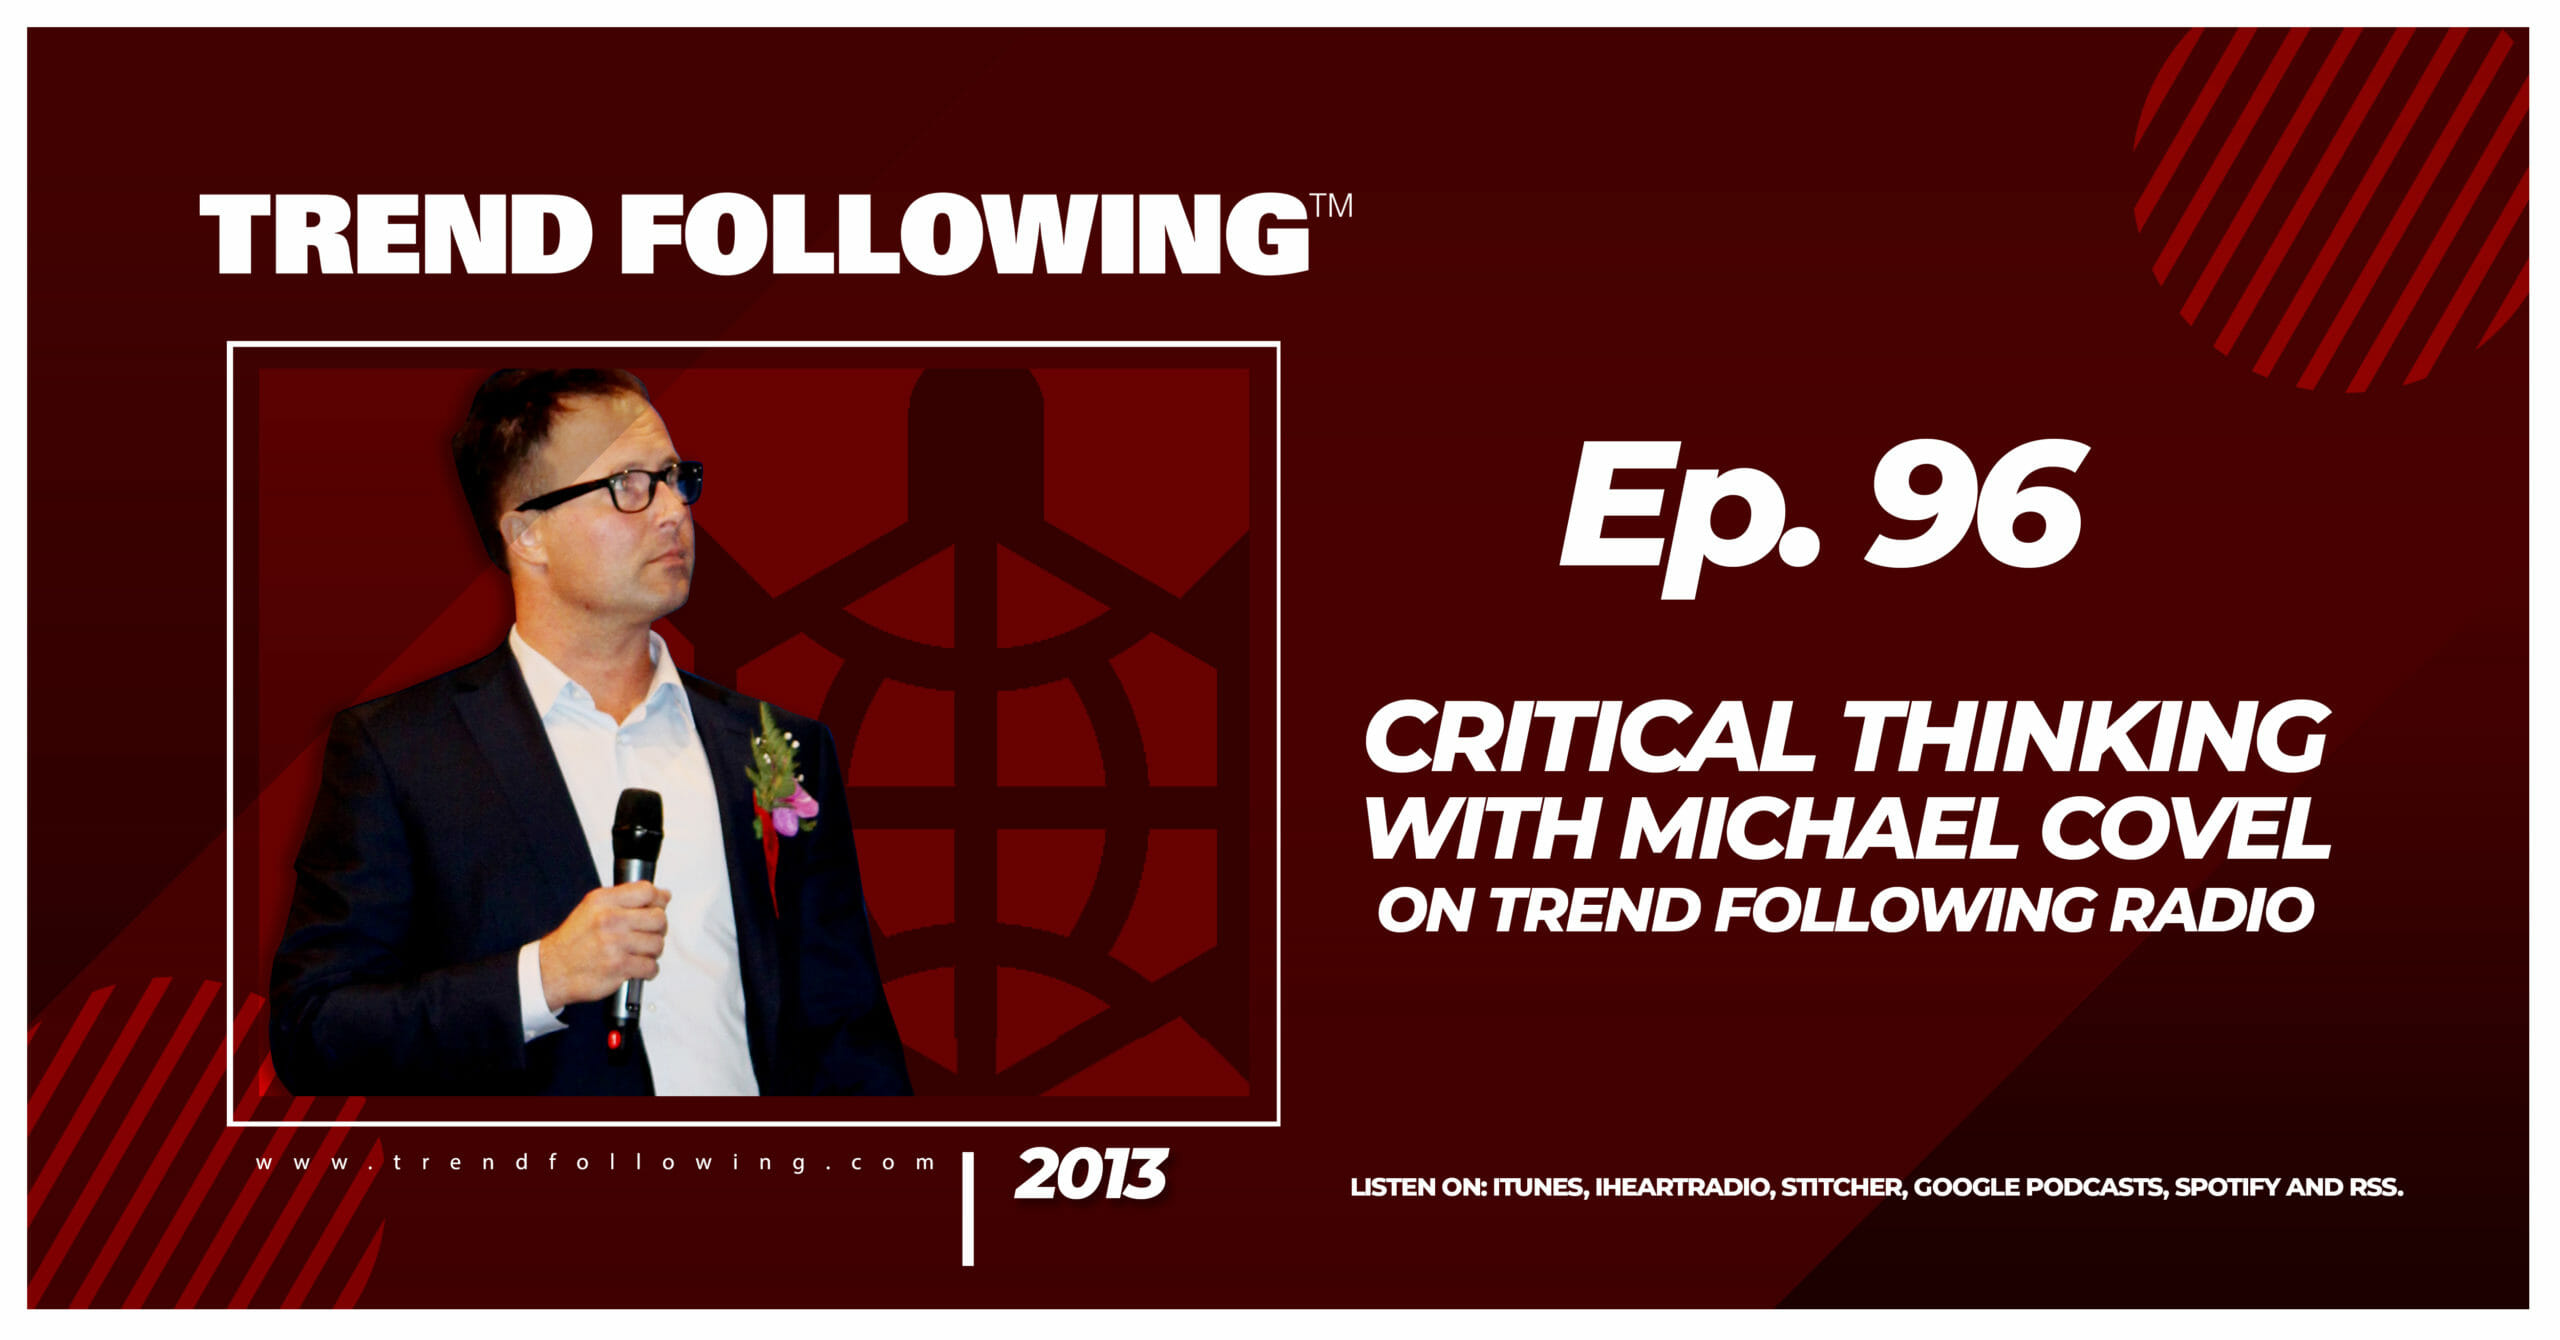 Critical Thinking with Michael Covel on Trend Following Radio